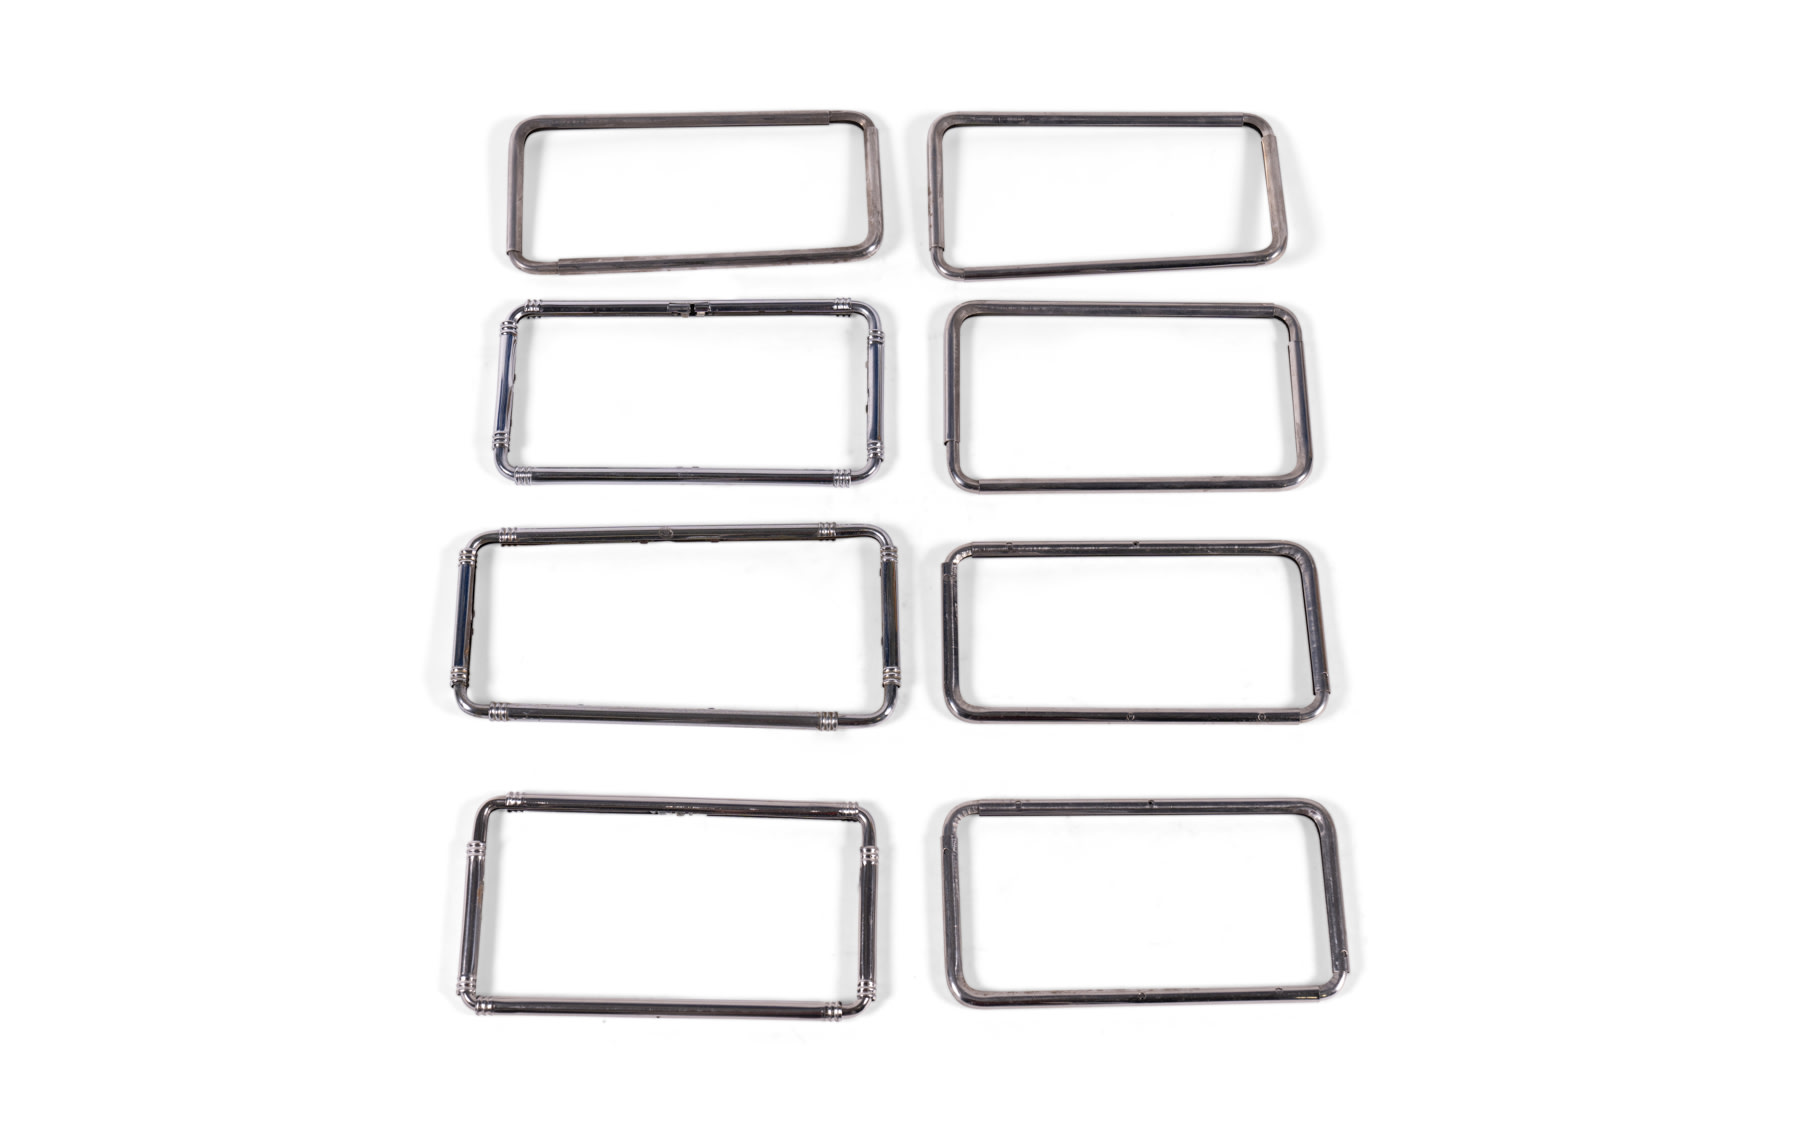 Assorted Adjustable License Plate Frames, c. 1940s and 1950s